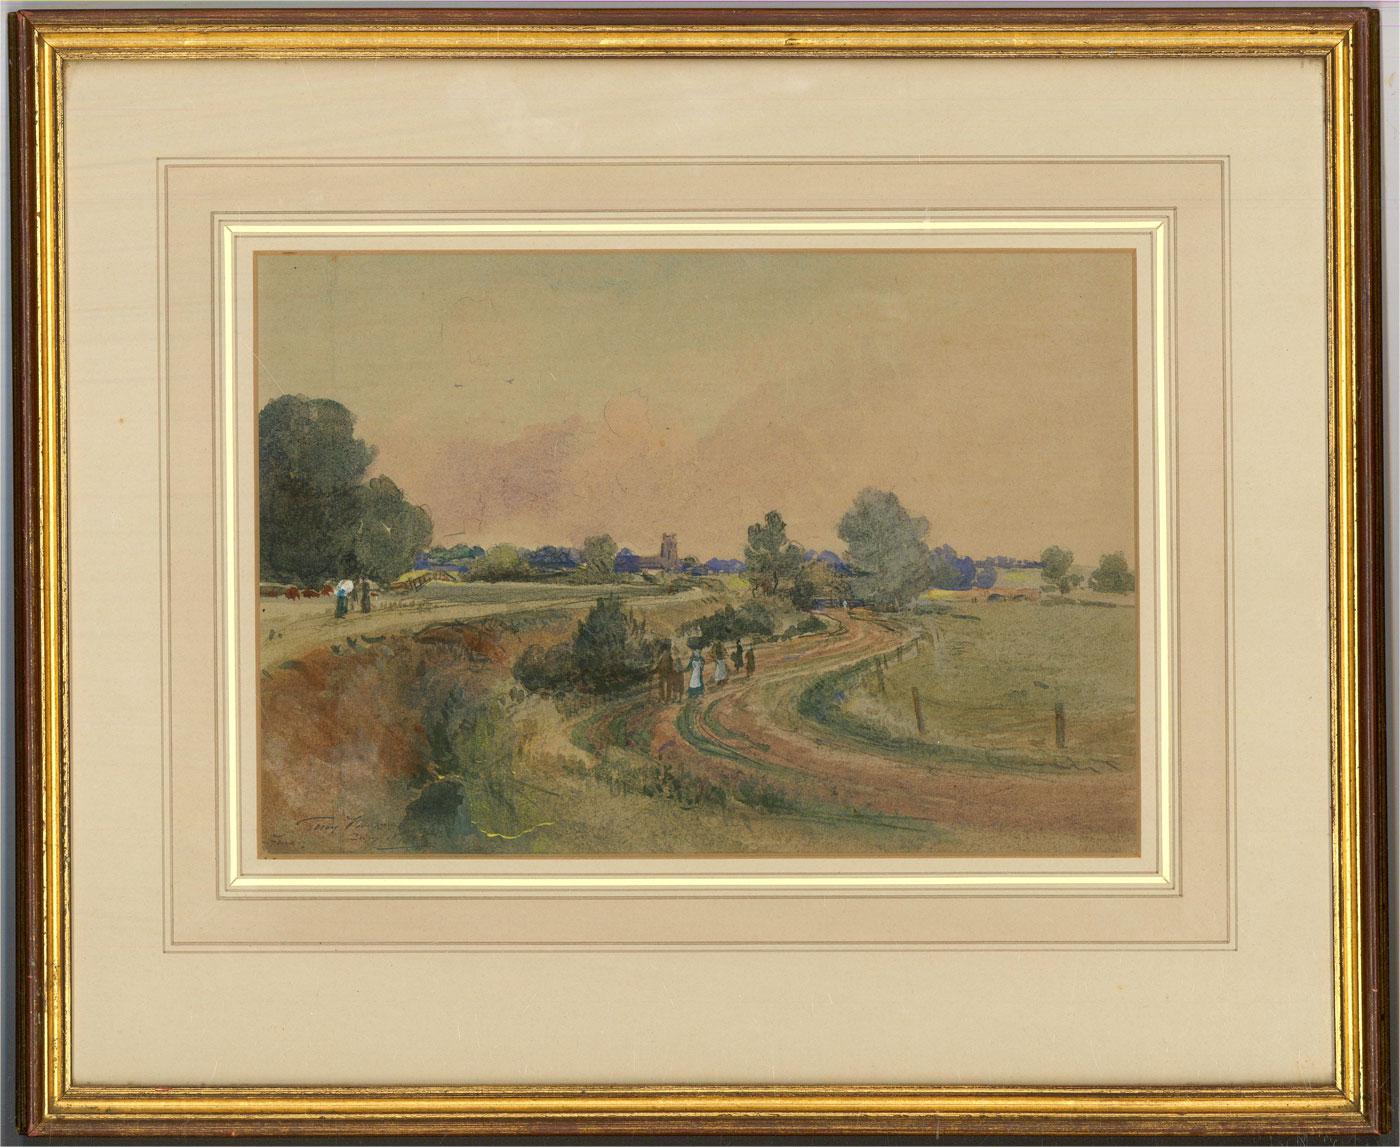 A charming rural scene showing figures walking along a winding country path that leads towards a small village. The artist has signed, dated and inscribed to the lower left corner. The painting has been presented in a simple gilt frame with